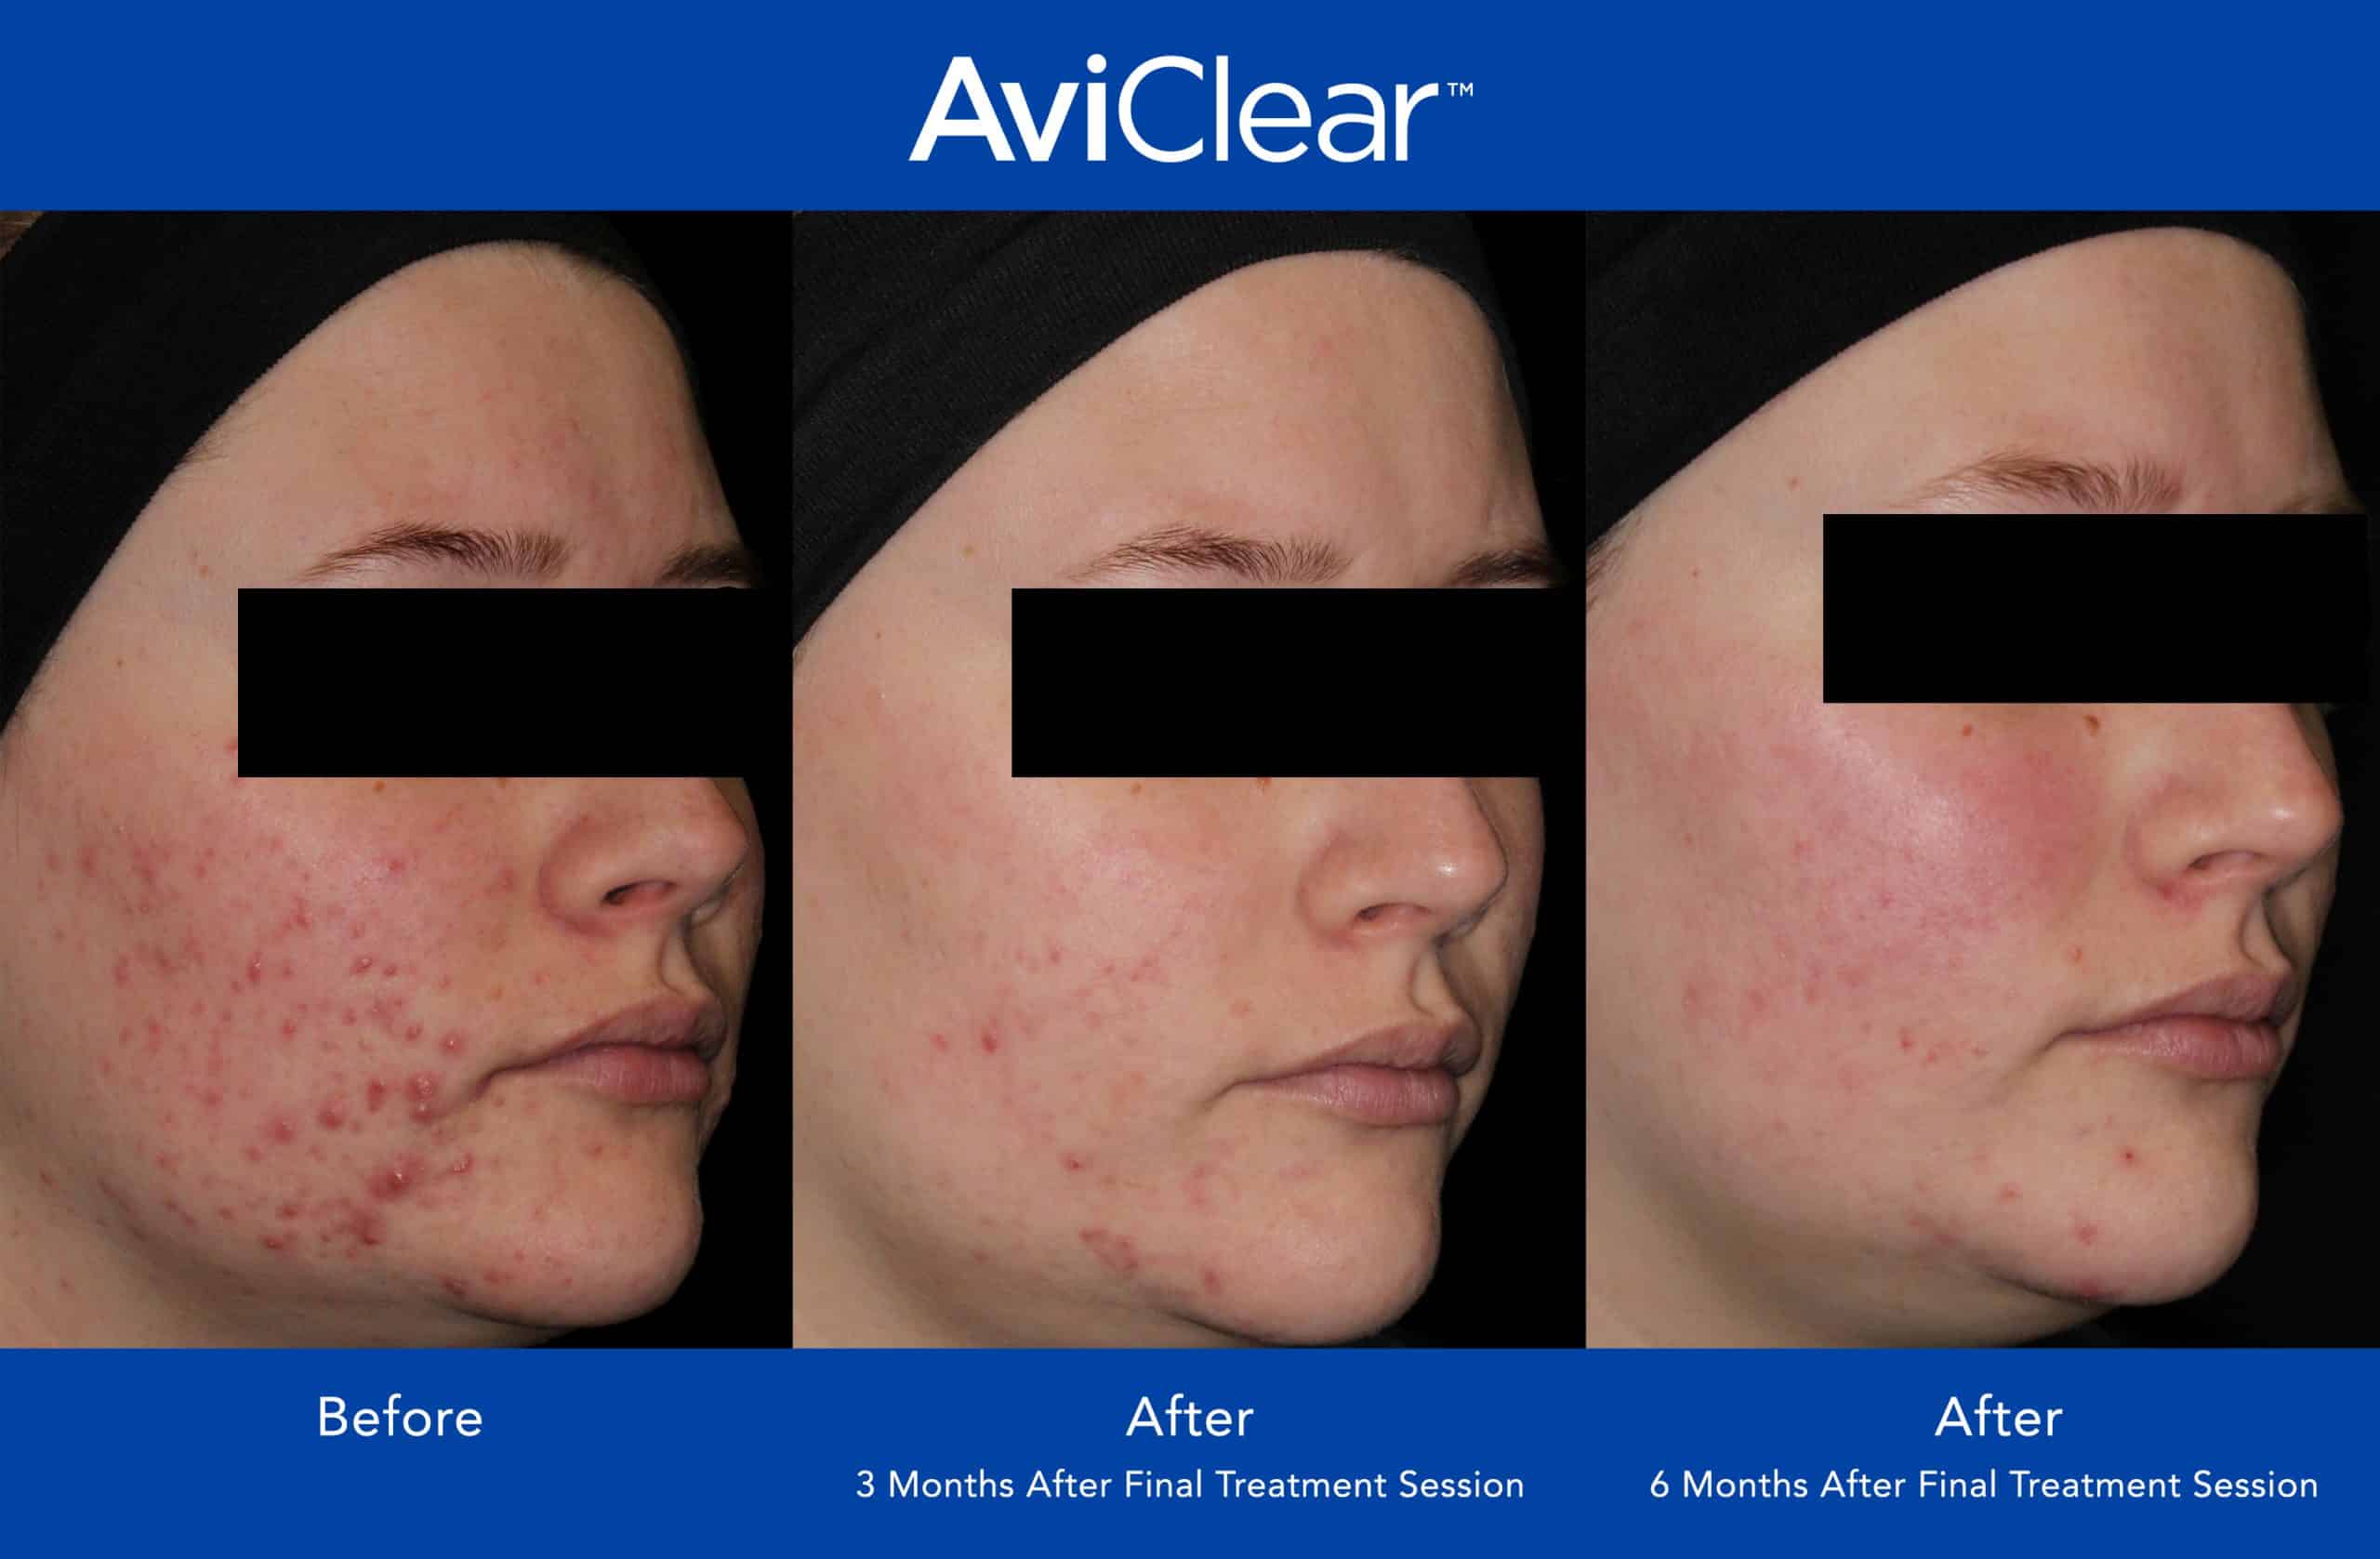 A before and after image of AviClear acne treatment in Newtown Square, PA